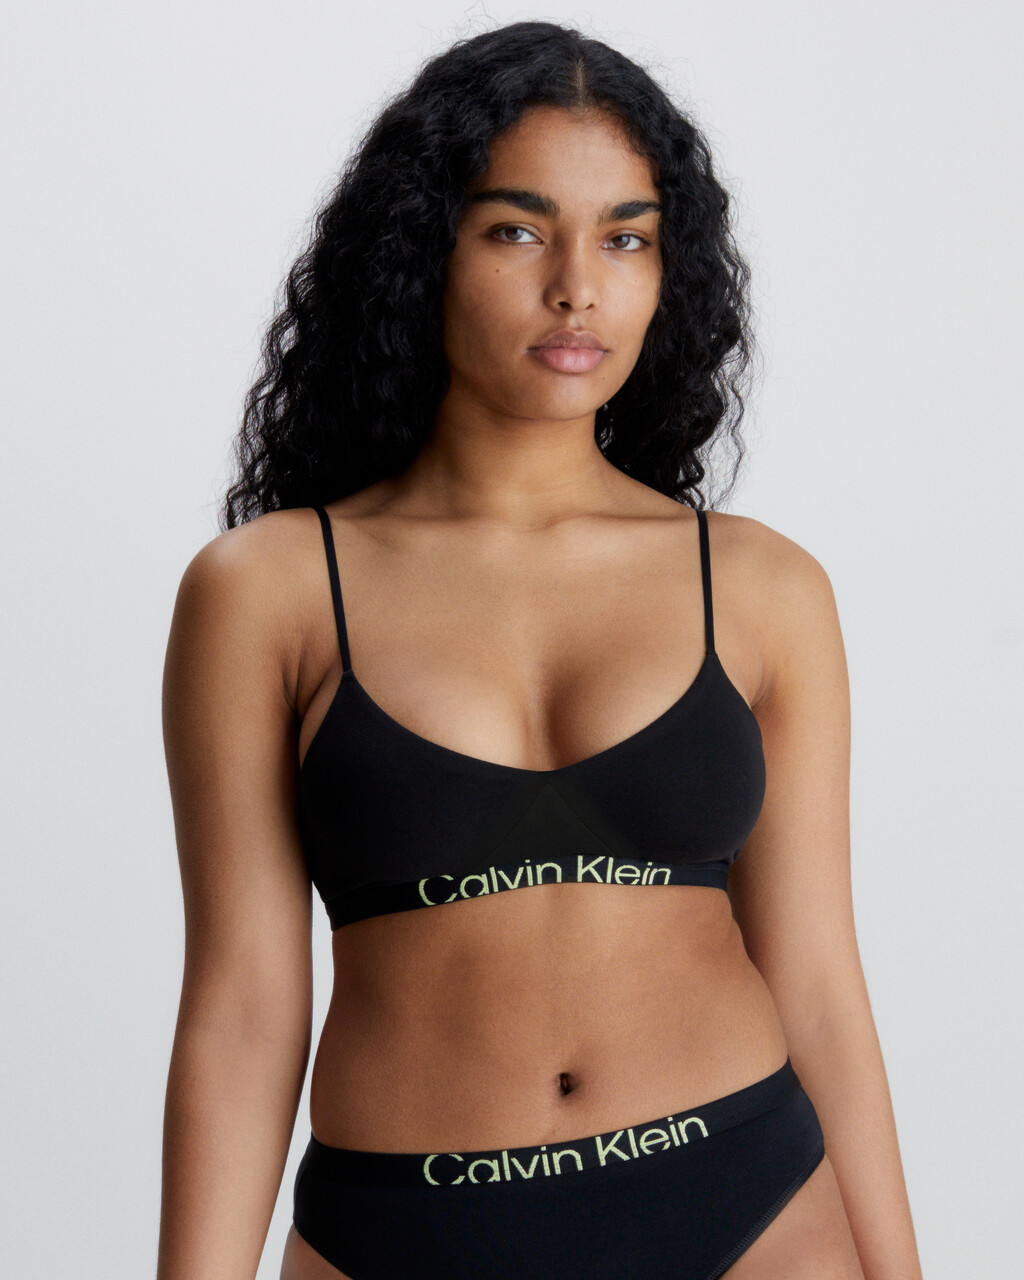 Calvin Klein Future Shift Unlined Bralette With Contrast, 47% OFF